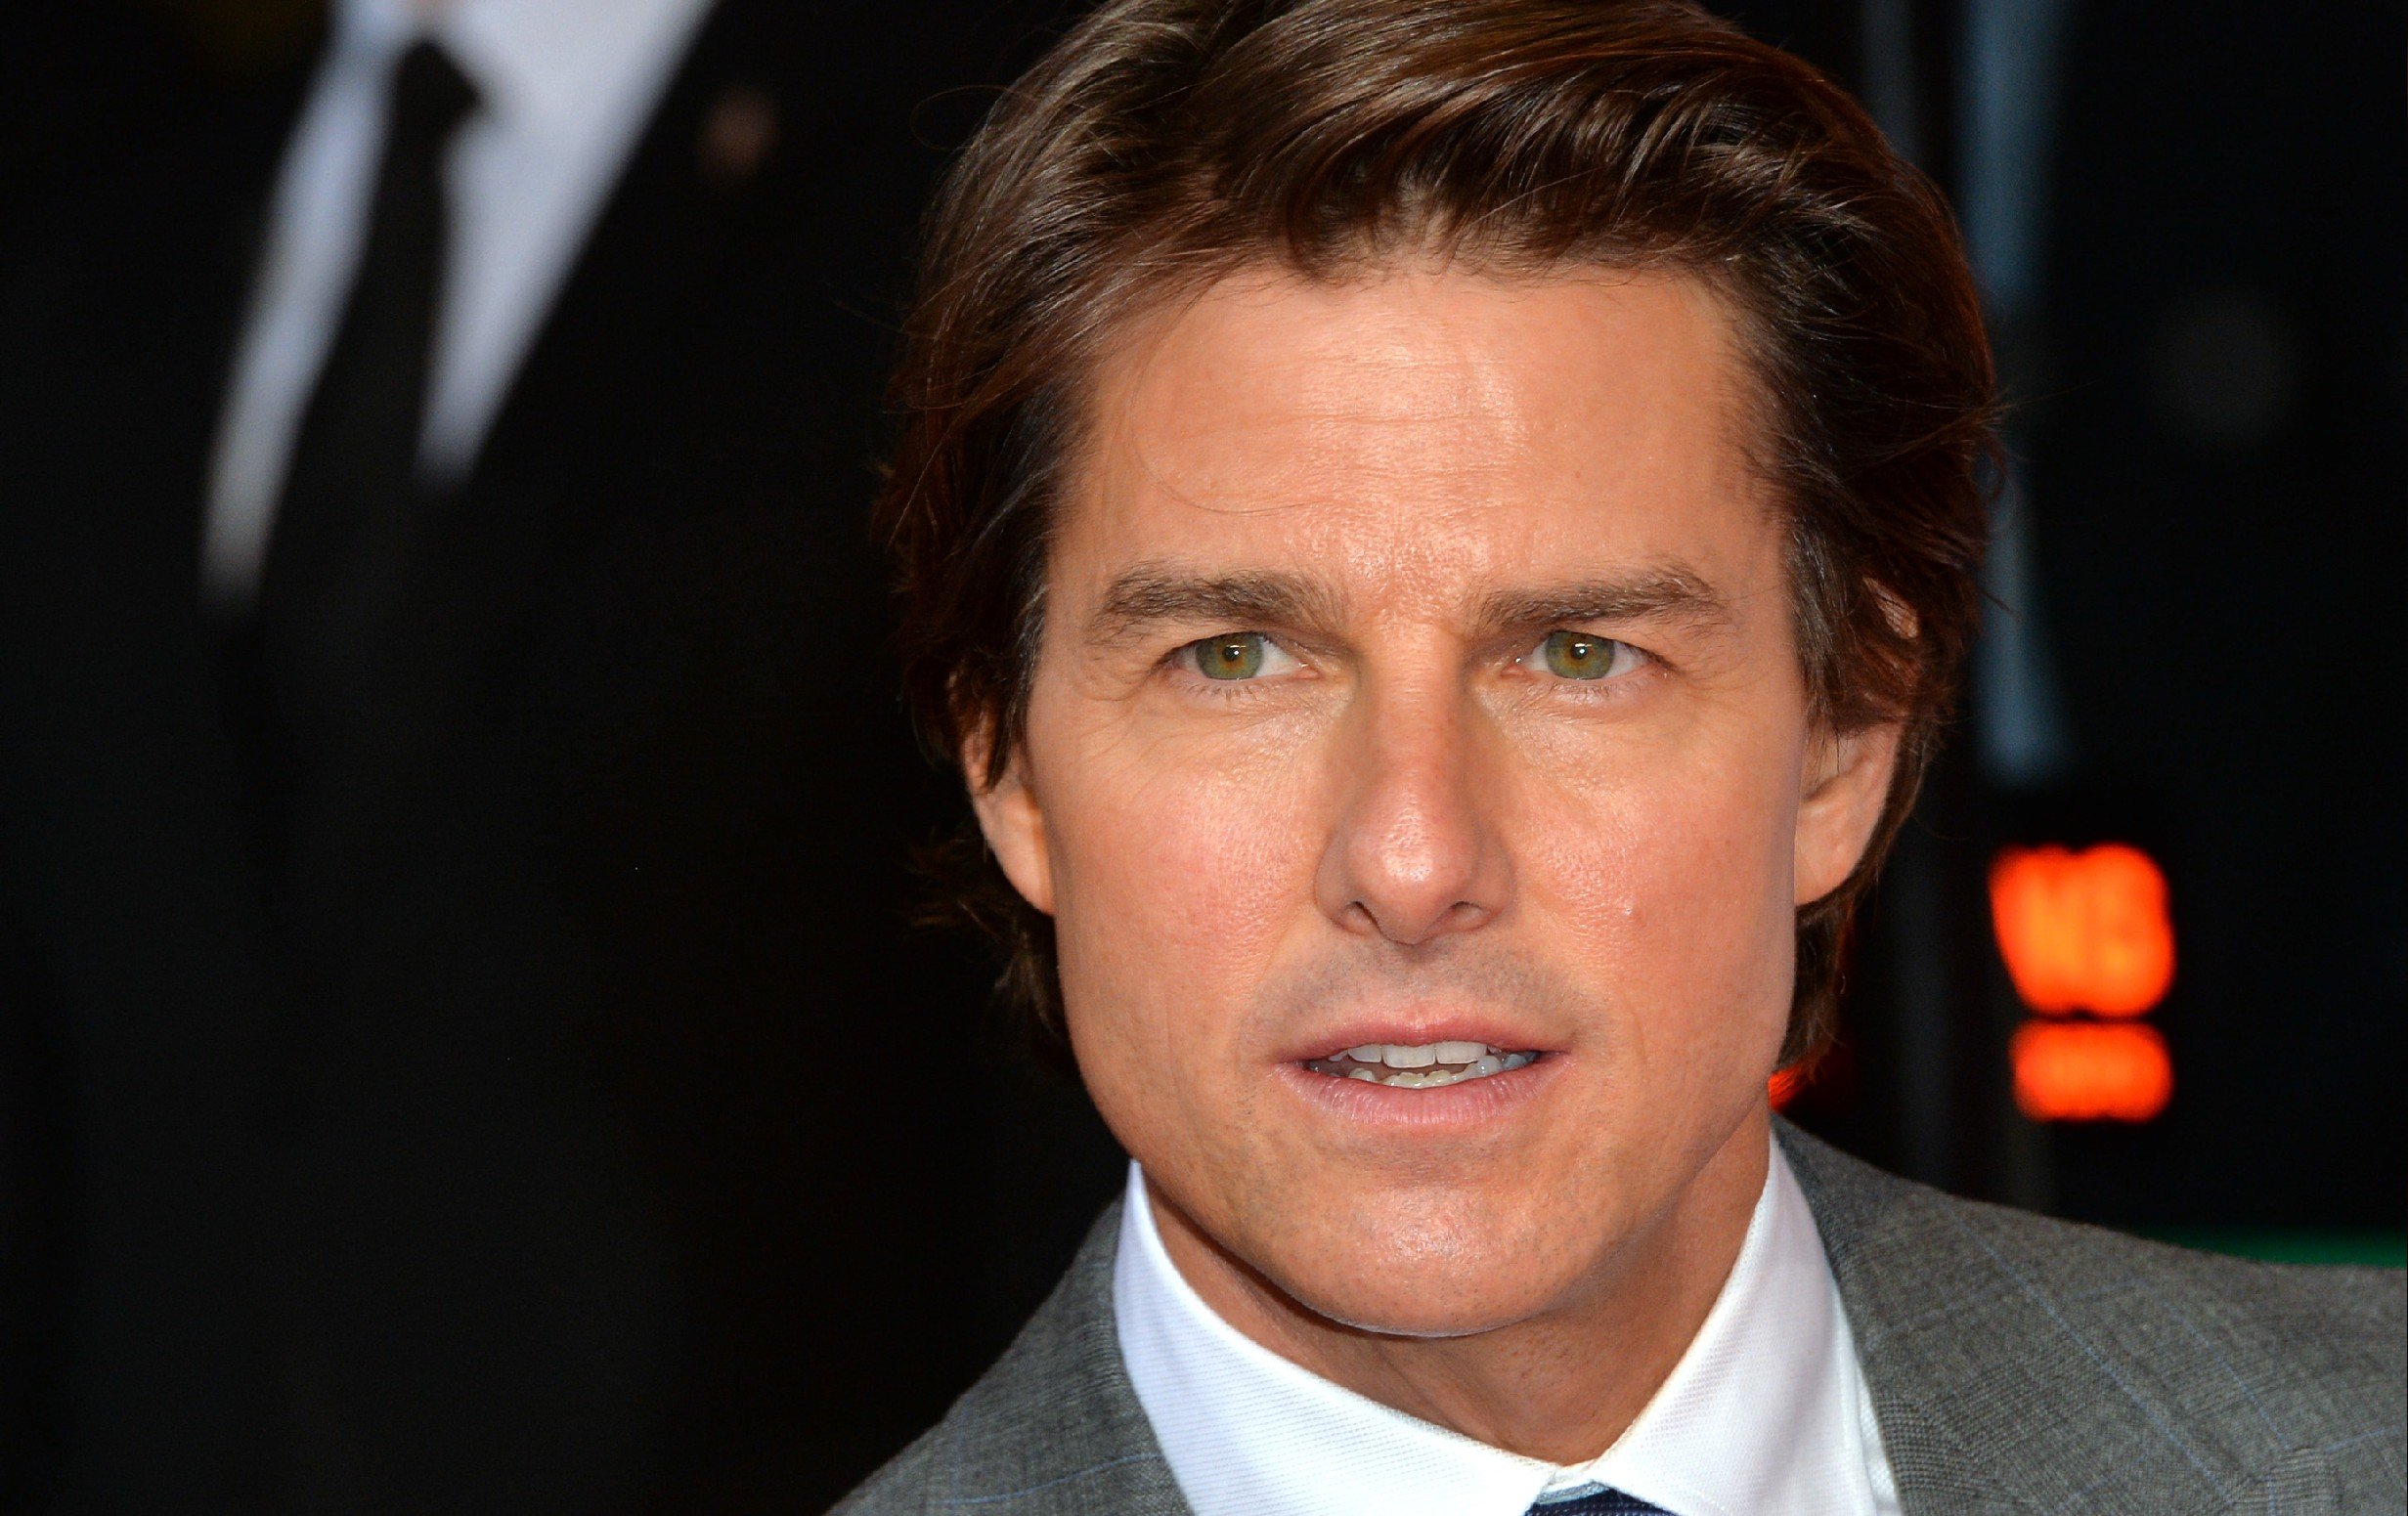 Can You Spot The Difference Between Real Tom Cruise And A Deep Fake?